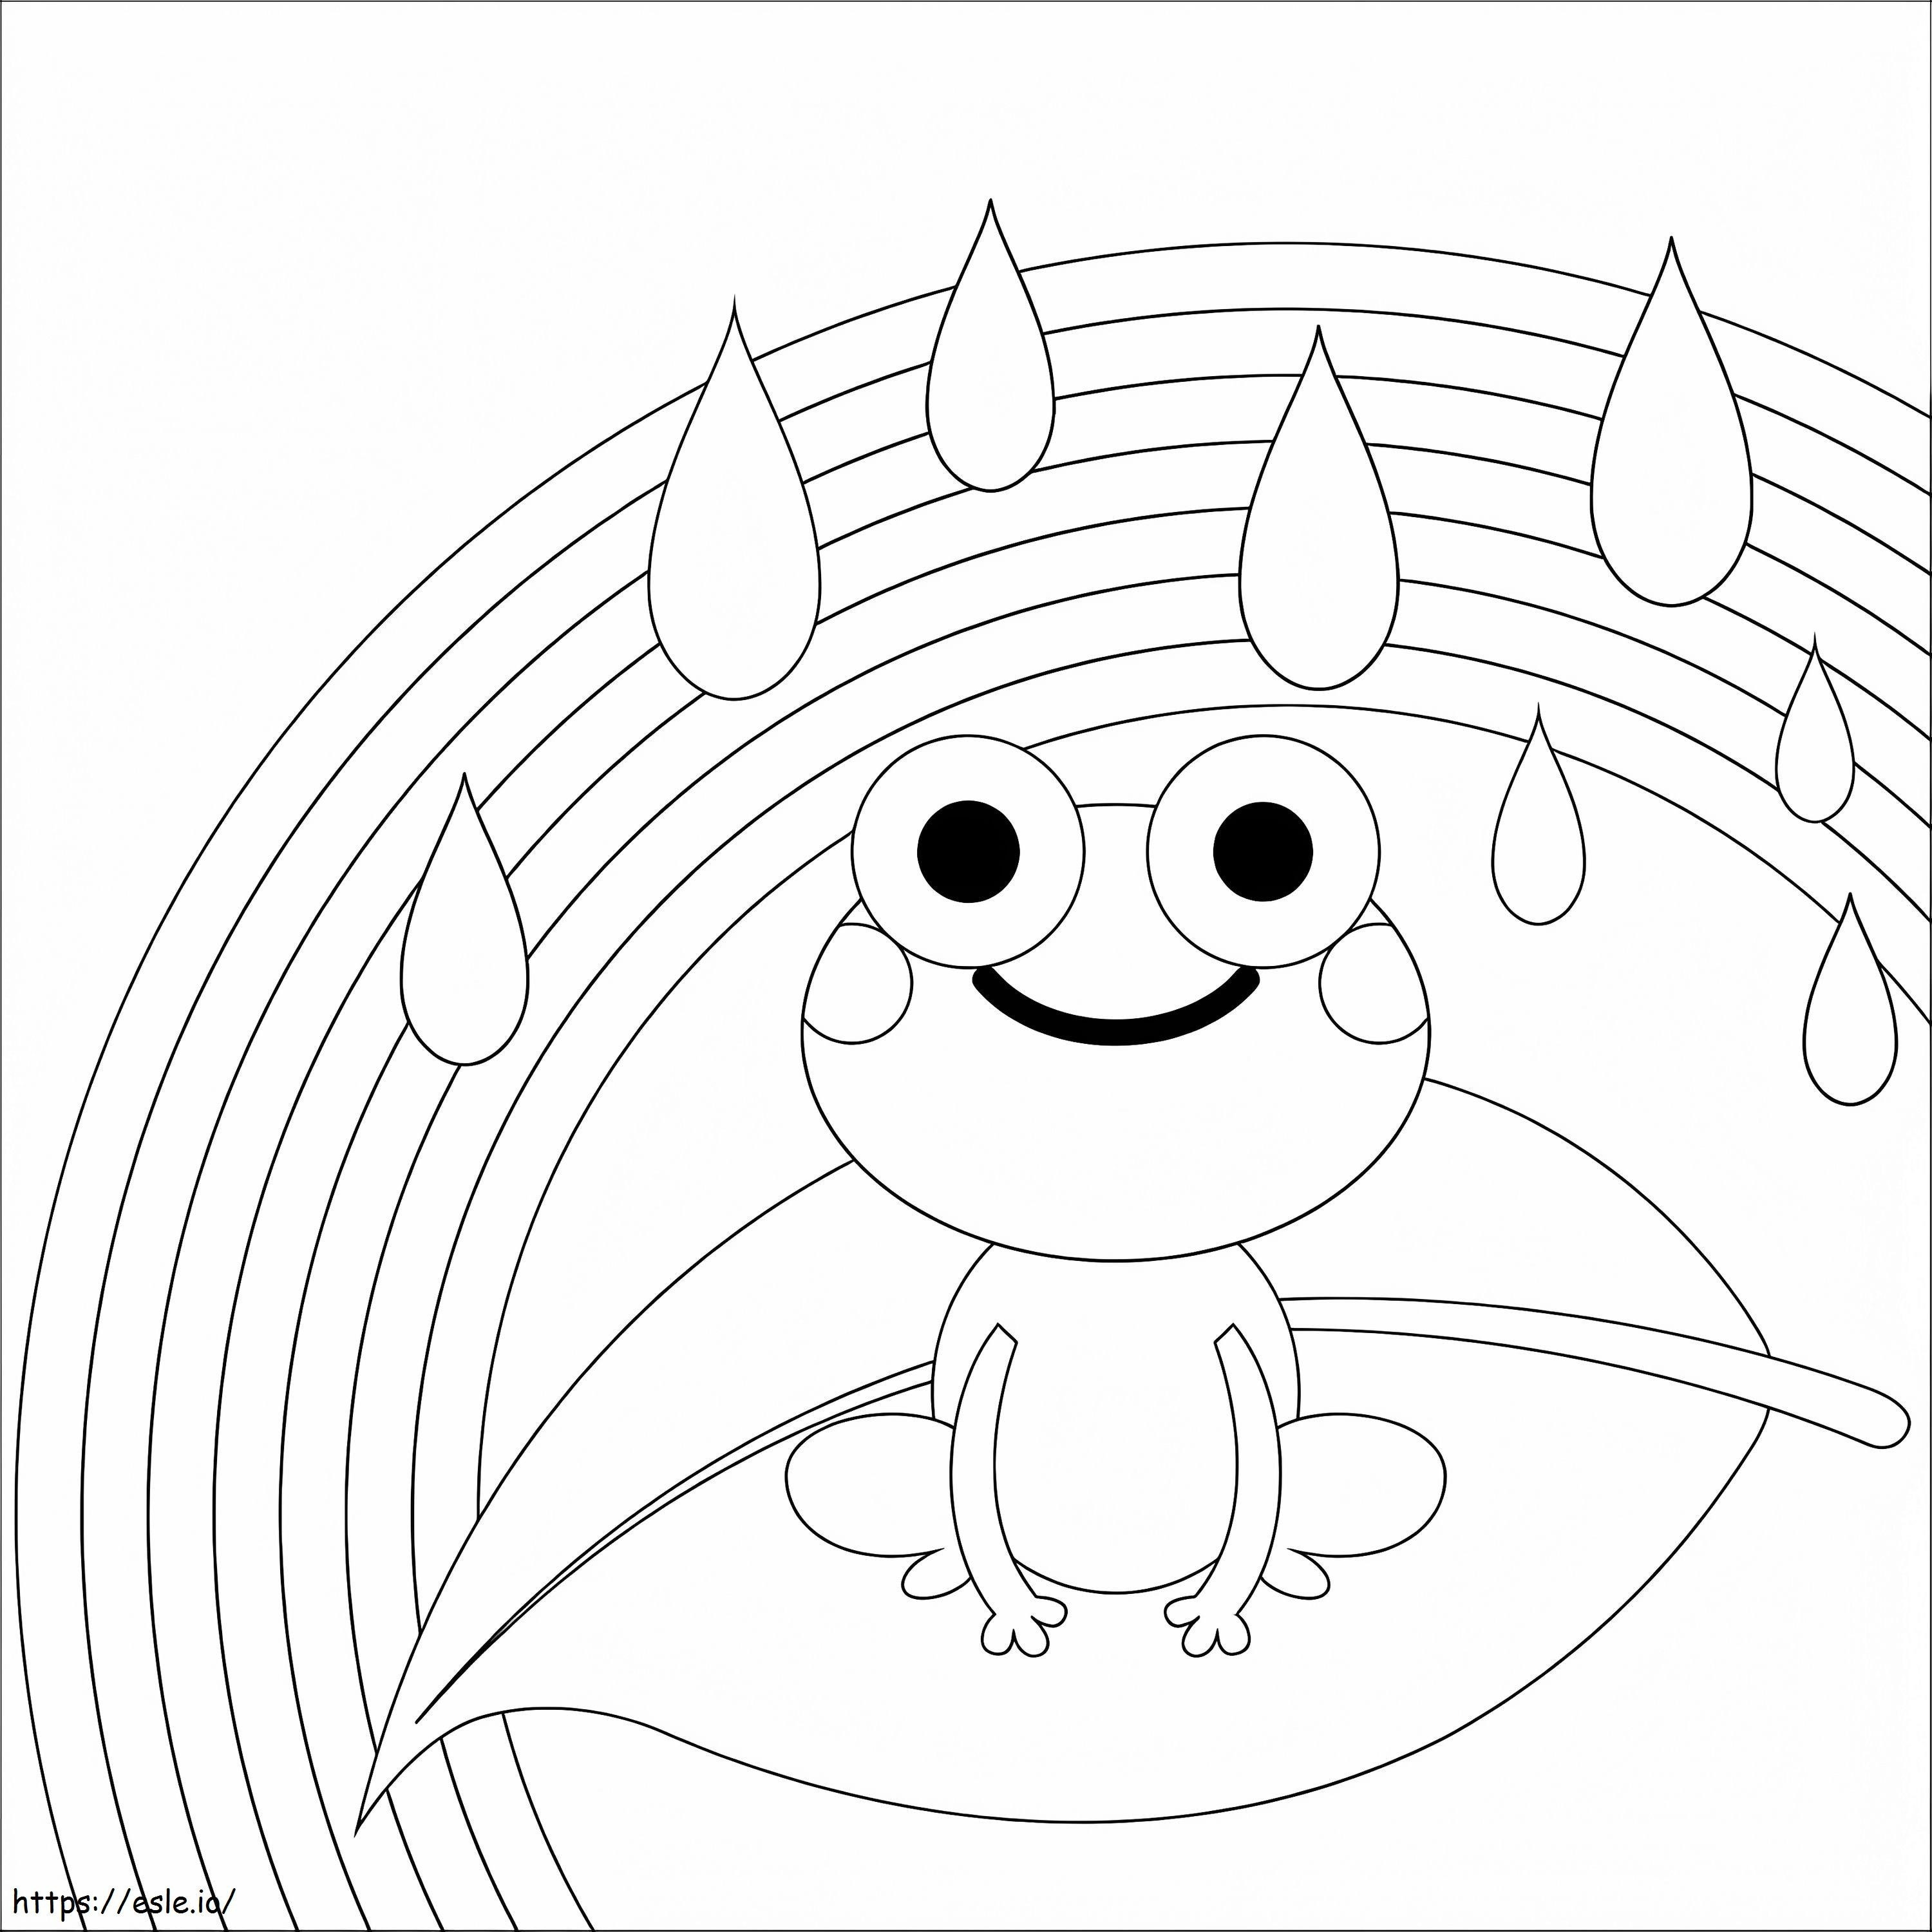 Frog And Rainbow coloring page